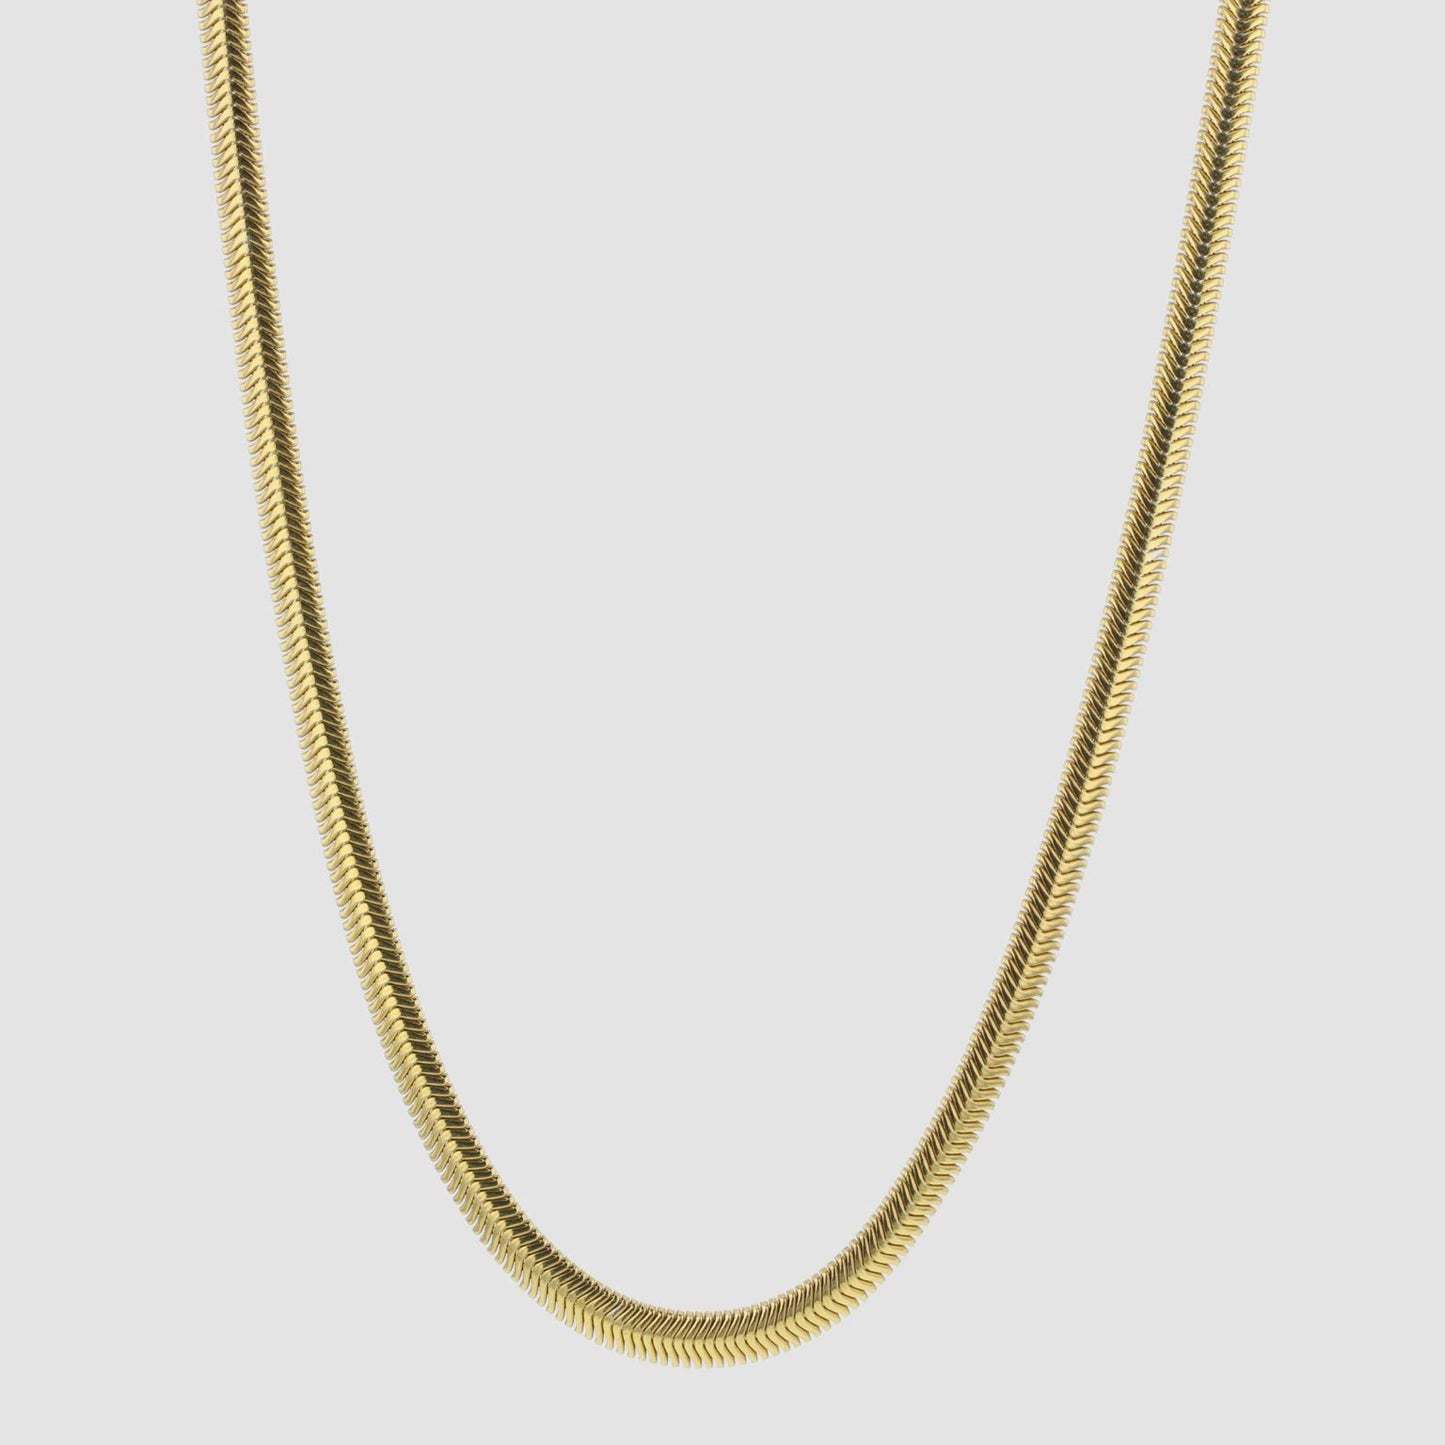 Hasla Snake Chain - Gold Plated